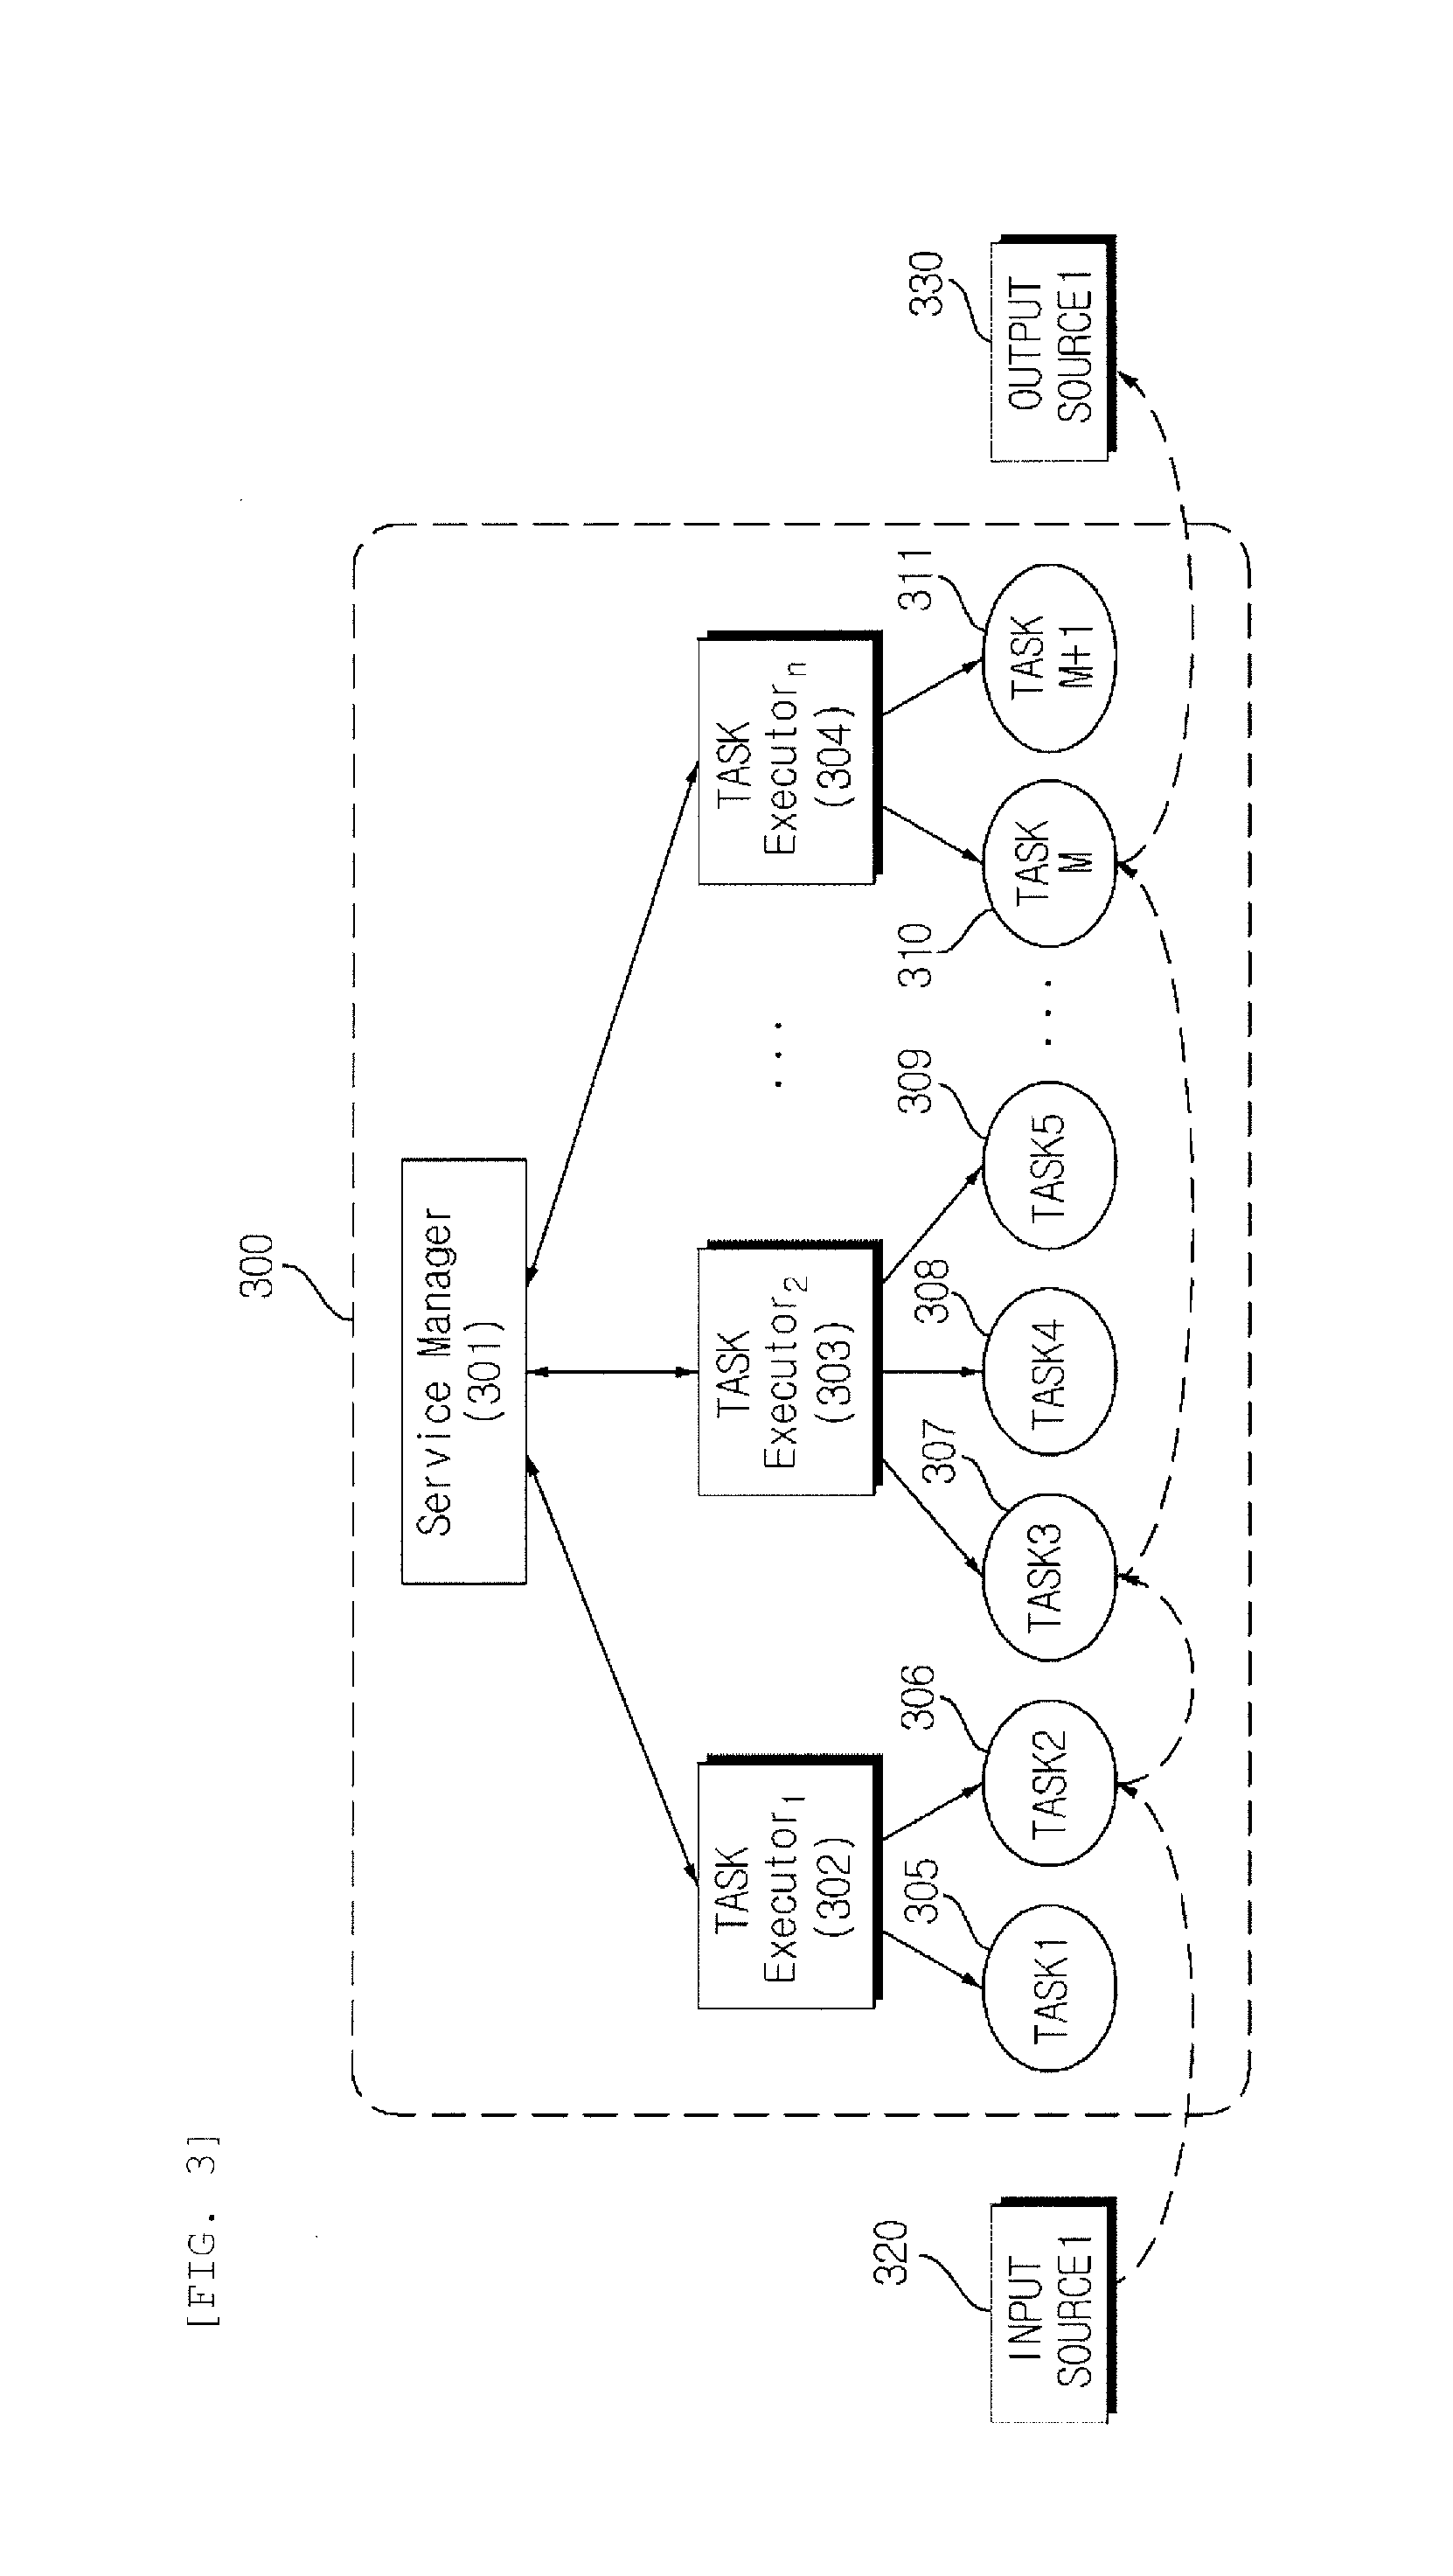 Service providing method and device using the same